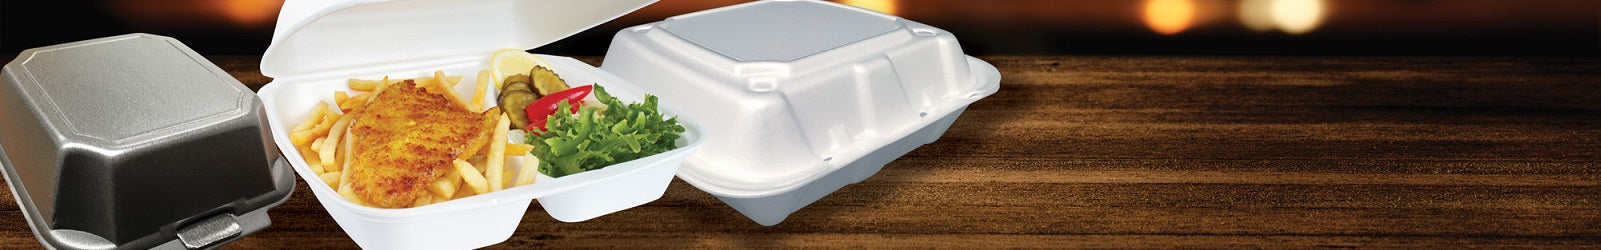 [25 PACK] Take Out Food Containers 45 oz Kraft Brown Paper Take Out Boxes  Microwaveable Leak and Grease Resistant Food Containers - To Go Containers